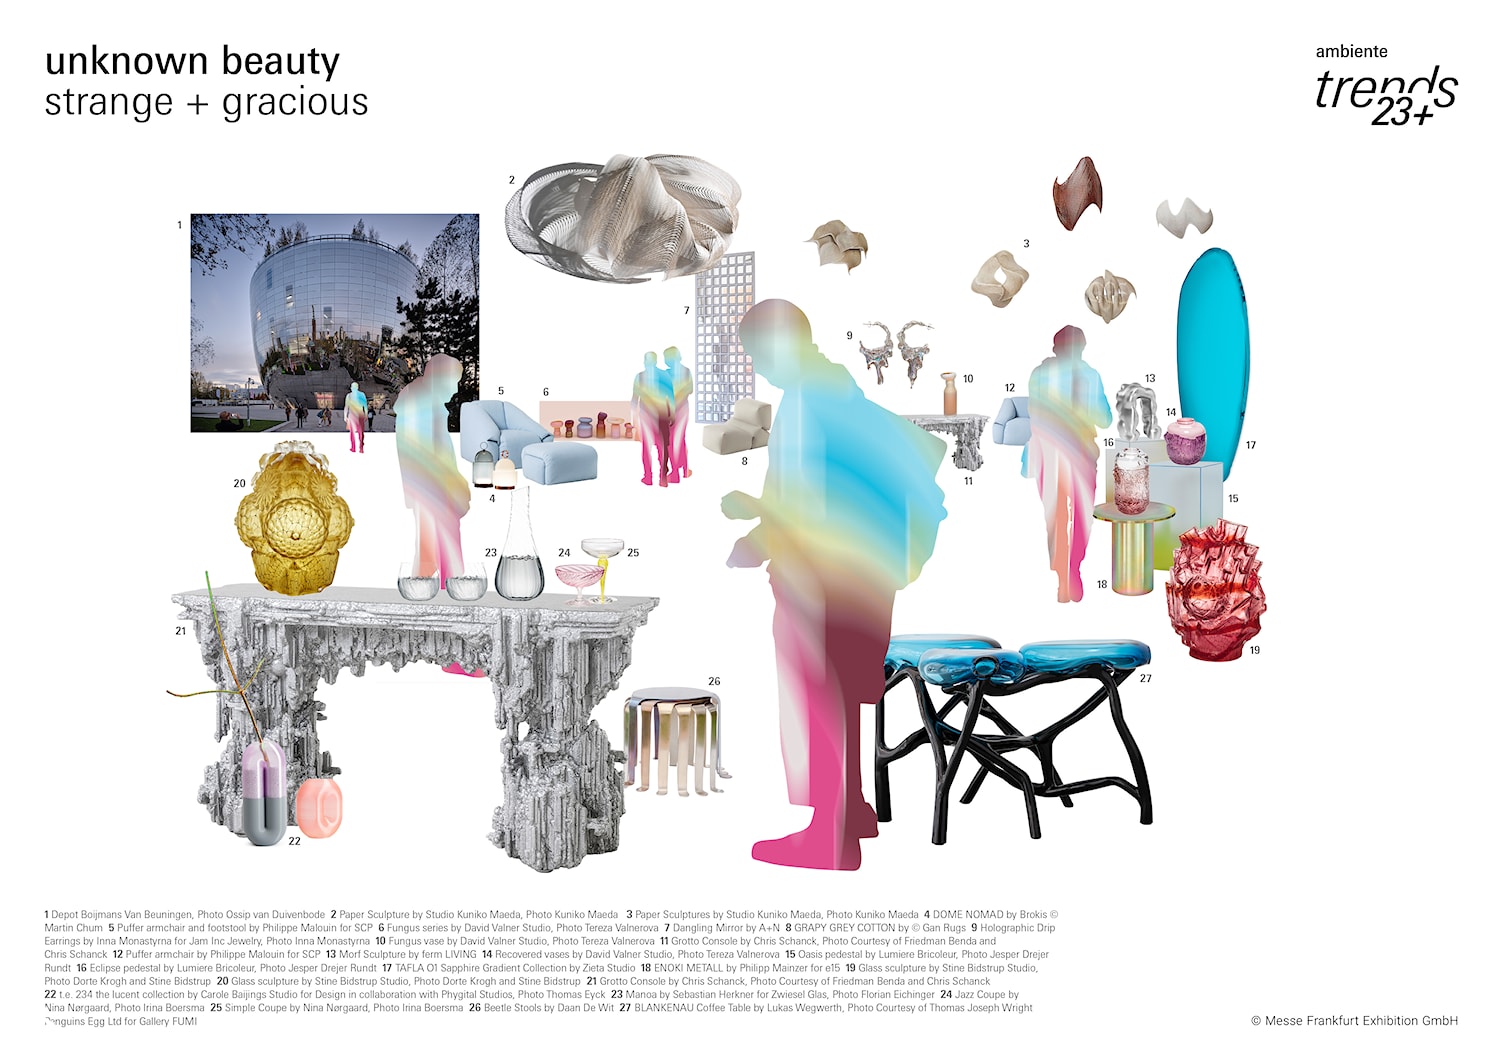 Ambiente 2023 - trend Unknown Beauty